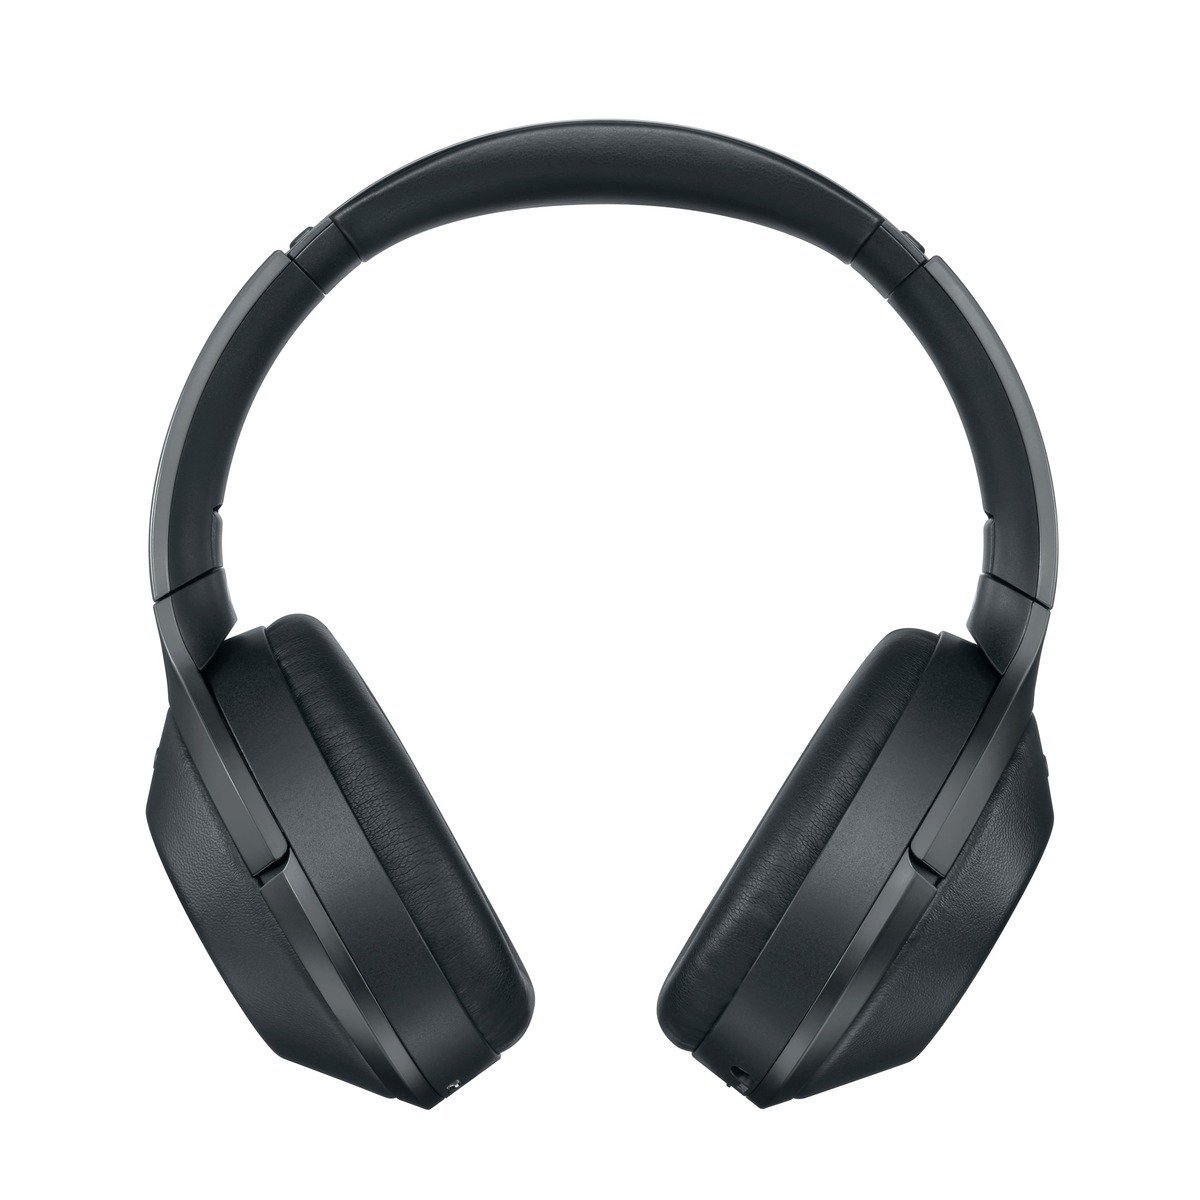 Sony&#039;s Premium MDR1000X Bluetooth Headphones Are On Sale for 25% Off [Deal]